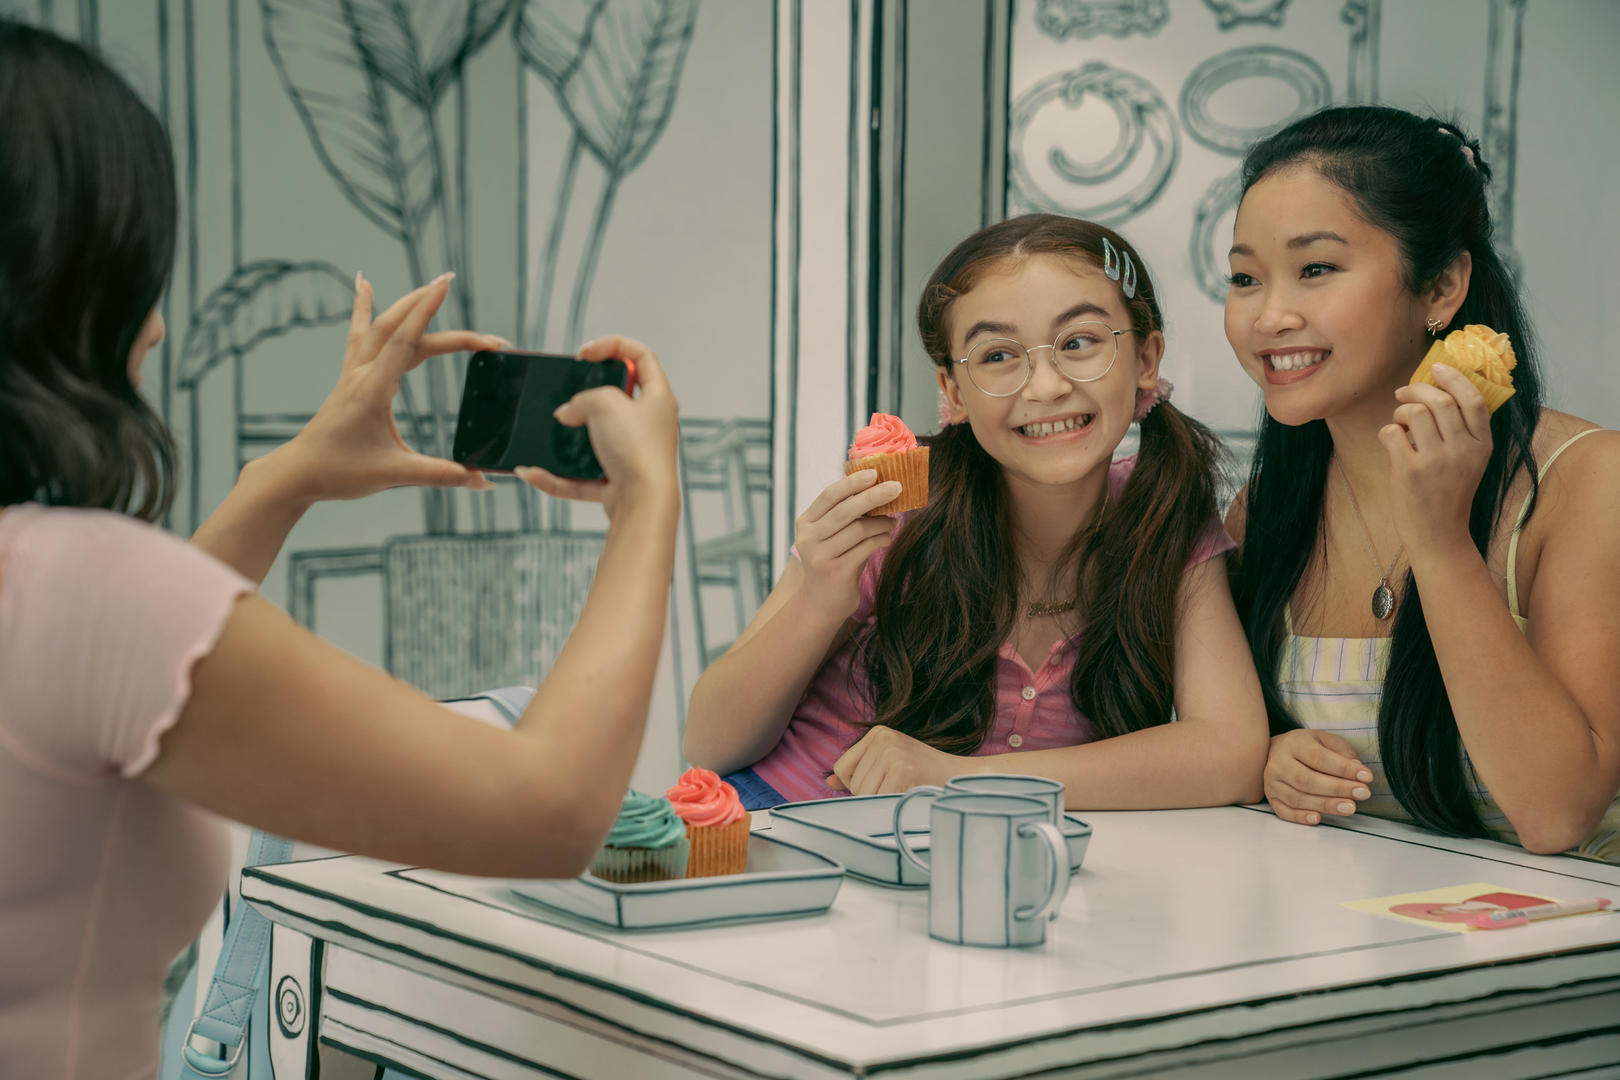 TO ALL THE BOYS: ALWAYS AND FOREVER (L-R): JANEL PARRISH as MARGOT, ANNA CATHCART as KITTY, LANA CONDOR as LARA JEAN. Cr: JUHAN NOH/NETFLIXÂ Â© 2021